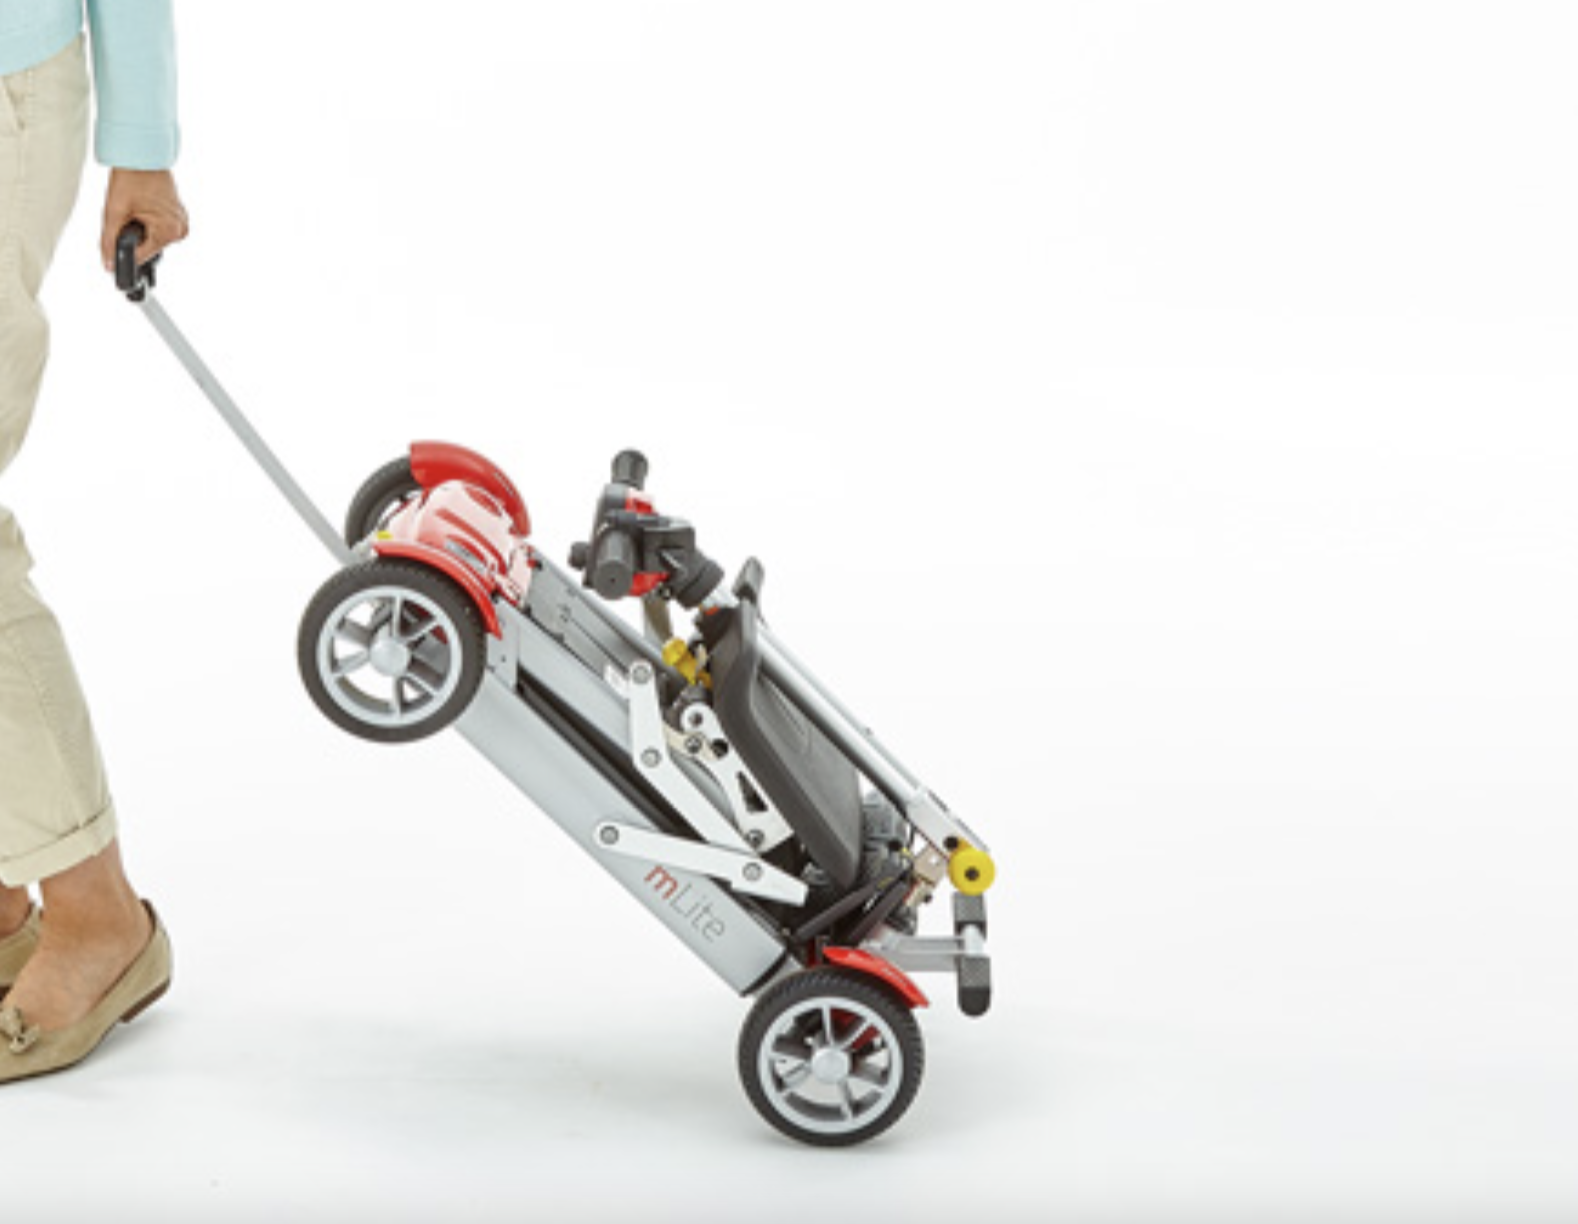 smartscoot foldable lightweight mobility scooter